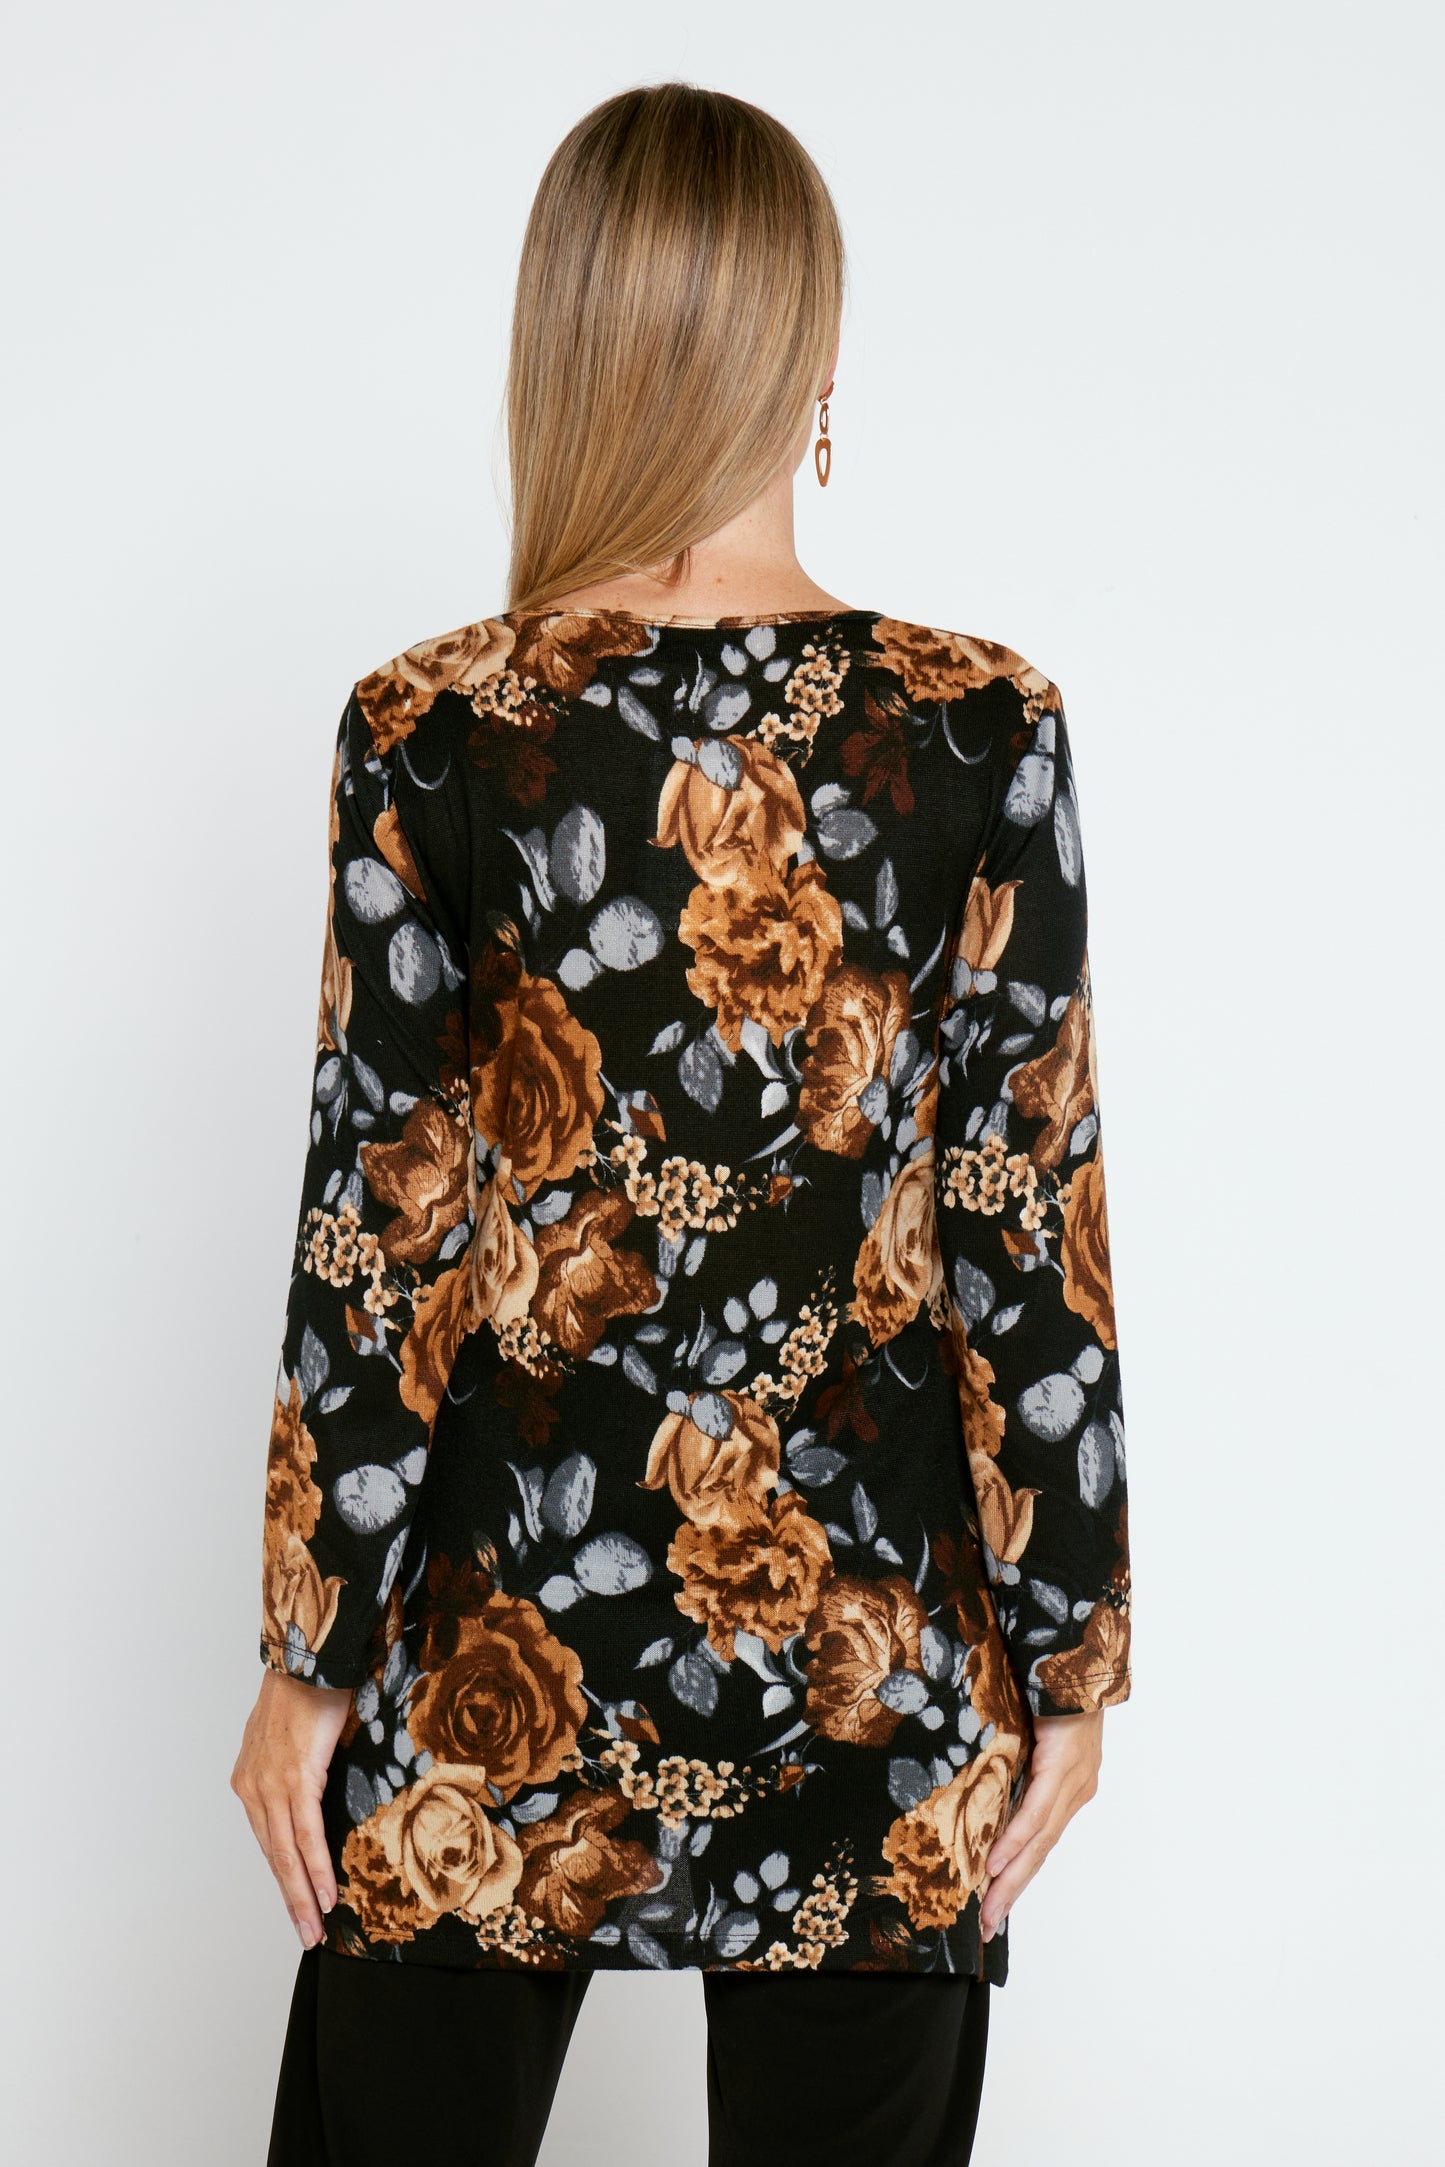 Addie Long Sleeve Knit Top - Autumn Bloom